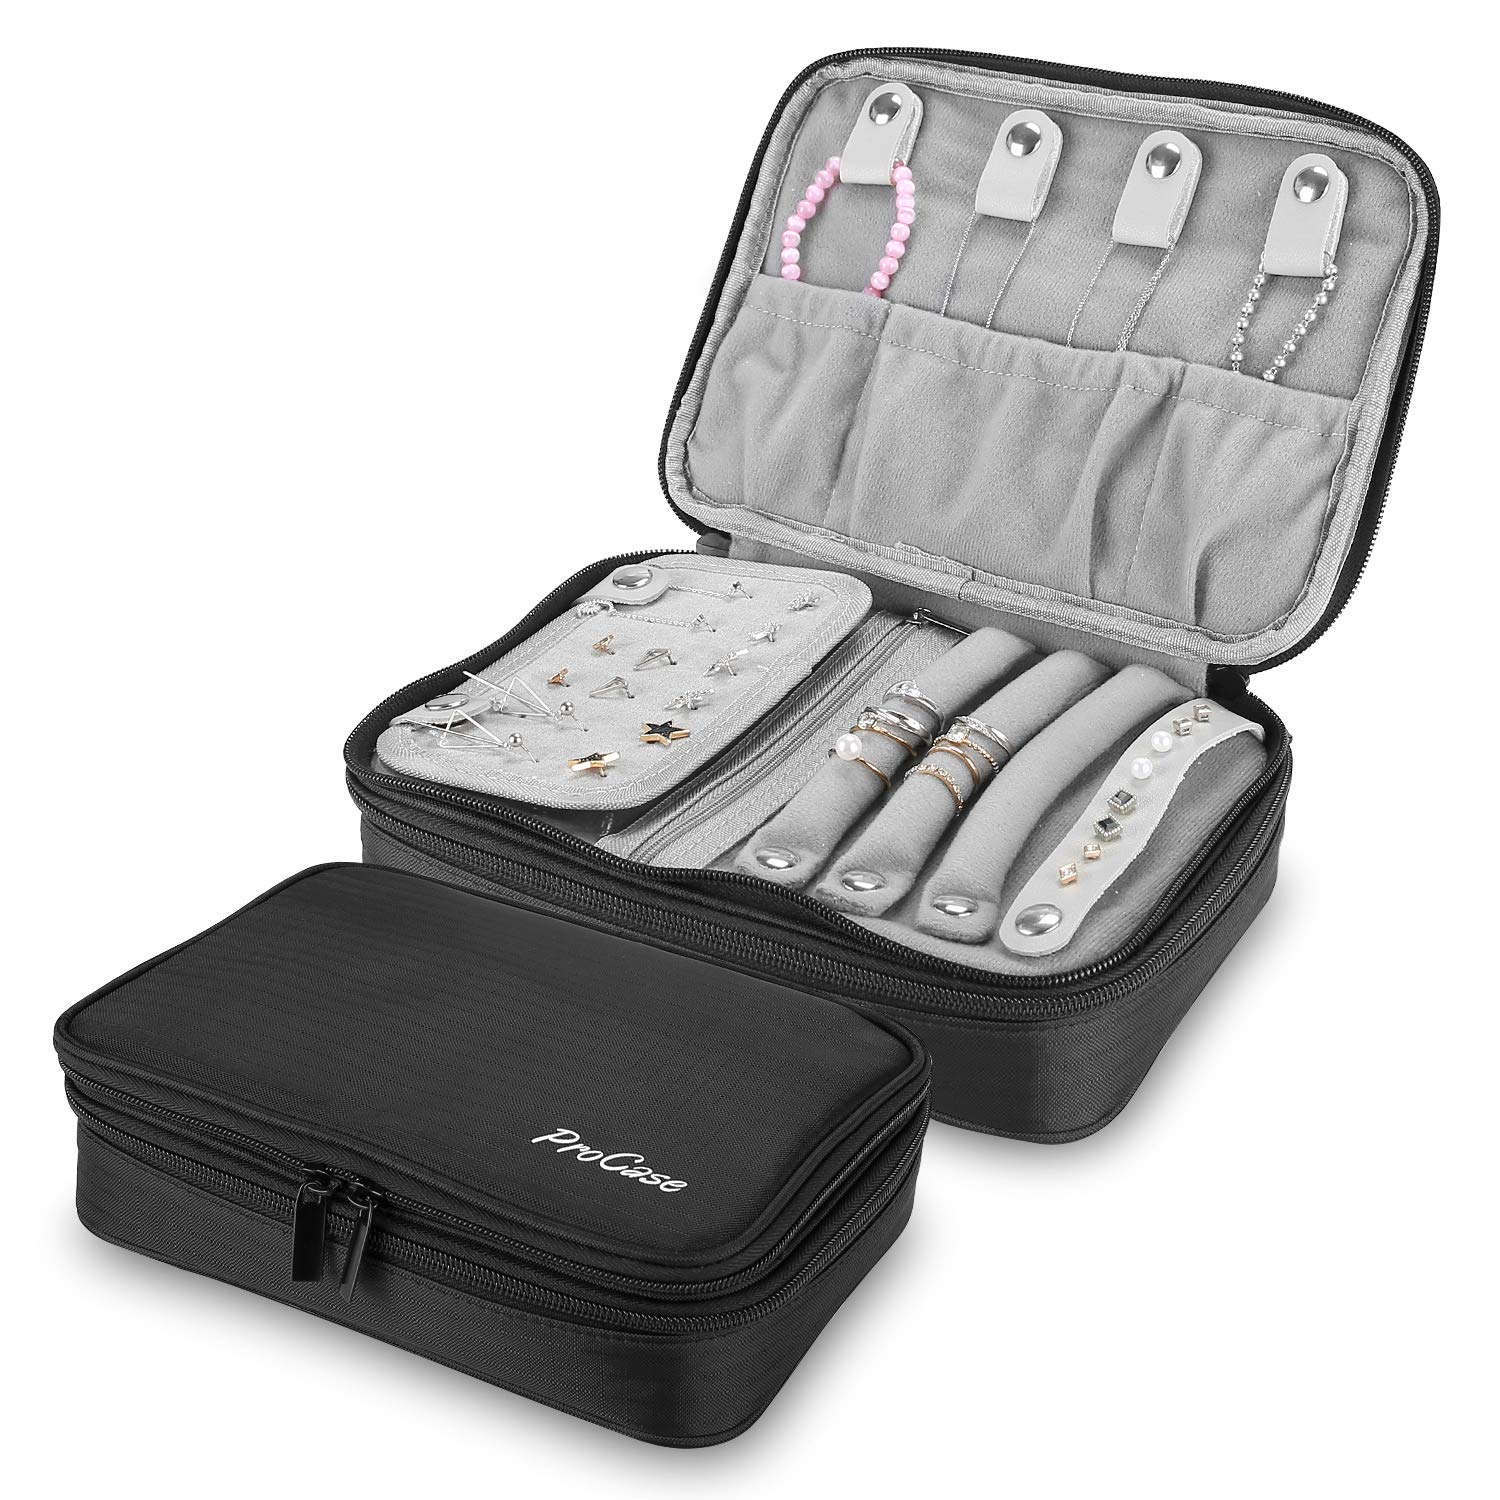 Carrying Case, For Cricut Explore Air 1 2 3, Double-layer Bag